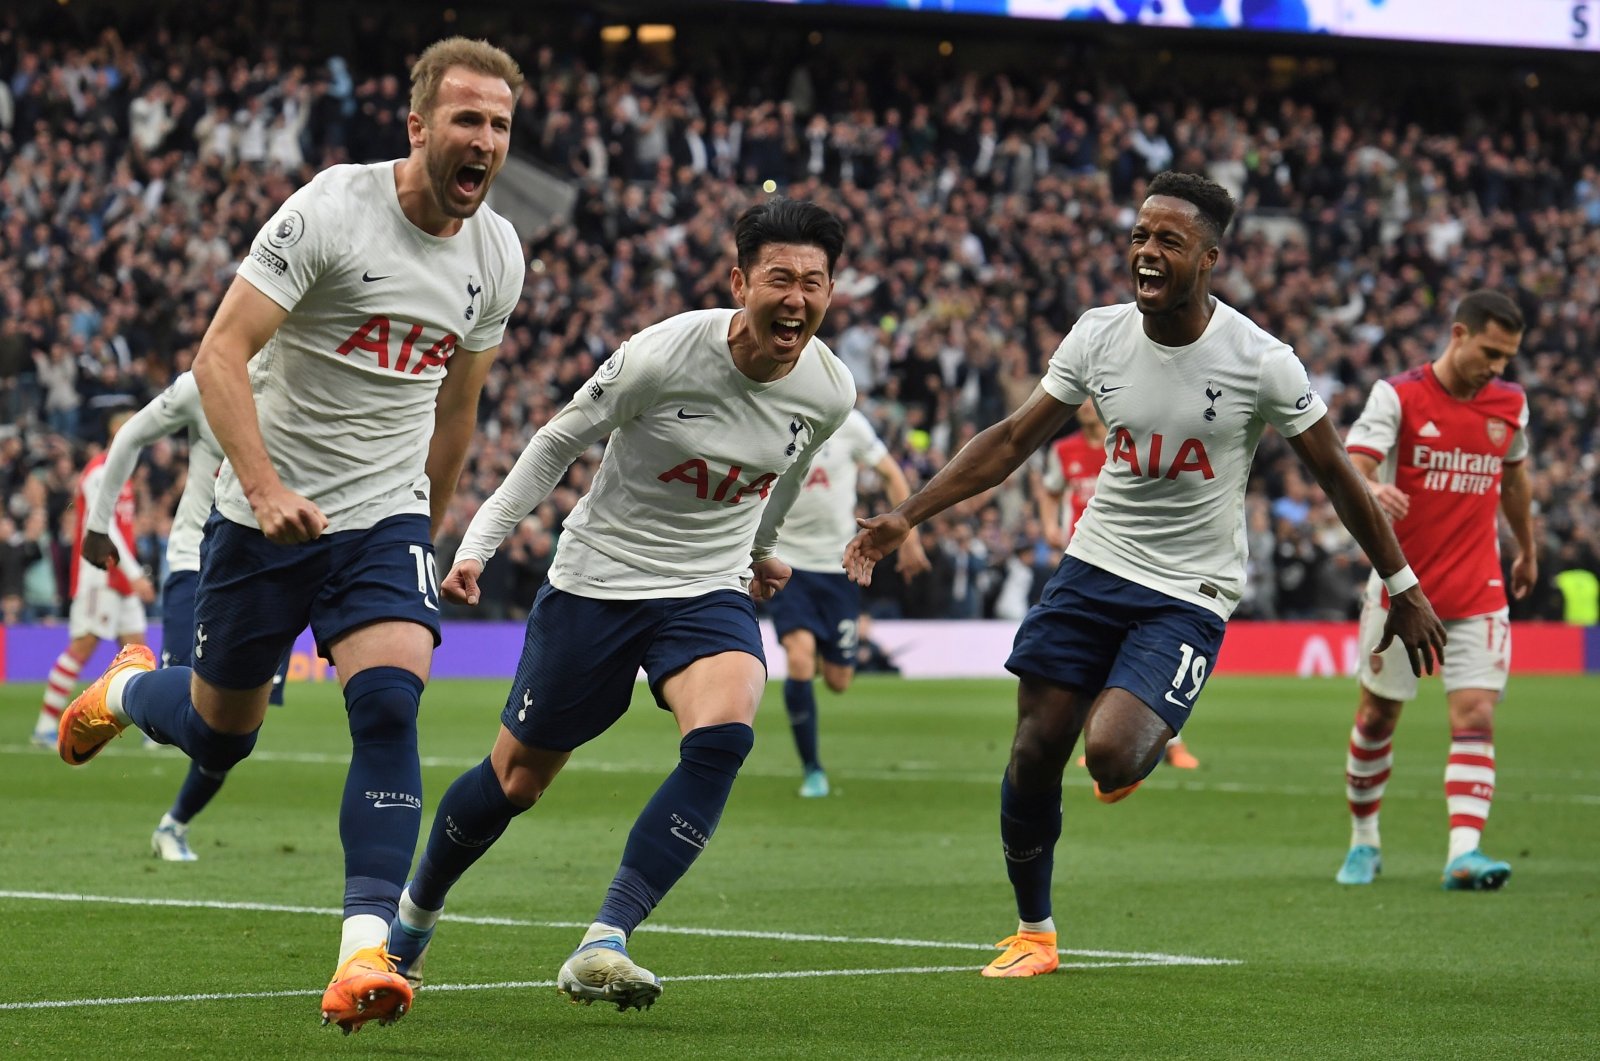 Harry Kane (L) of Tottenham celebrates with teammates Son Heung-min (C) and Ryan Sessegnon (2-R) after scoring the 1-0 lead from the penalty spot during the English Premier League soccer match between Tottenham Hotspur and Arsenal FC in London, Britain, May 12, 2022. (EPA Photo)